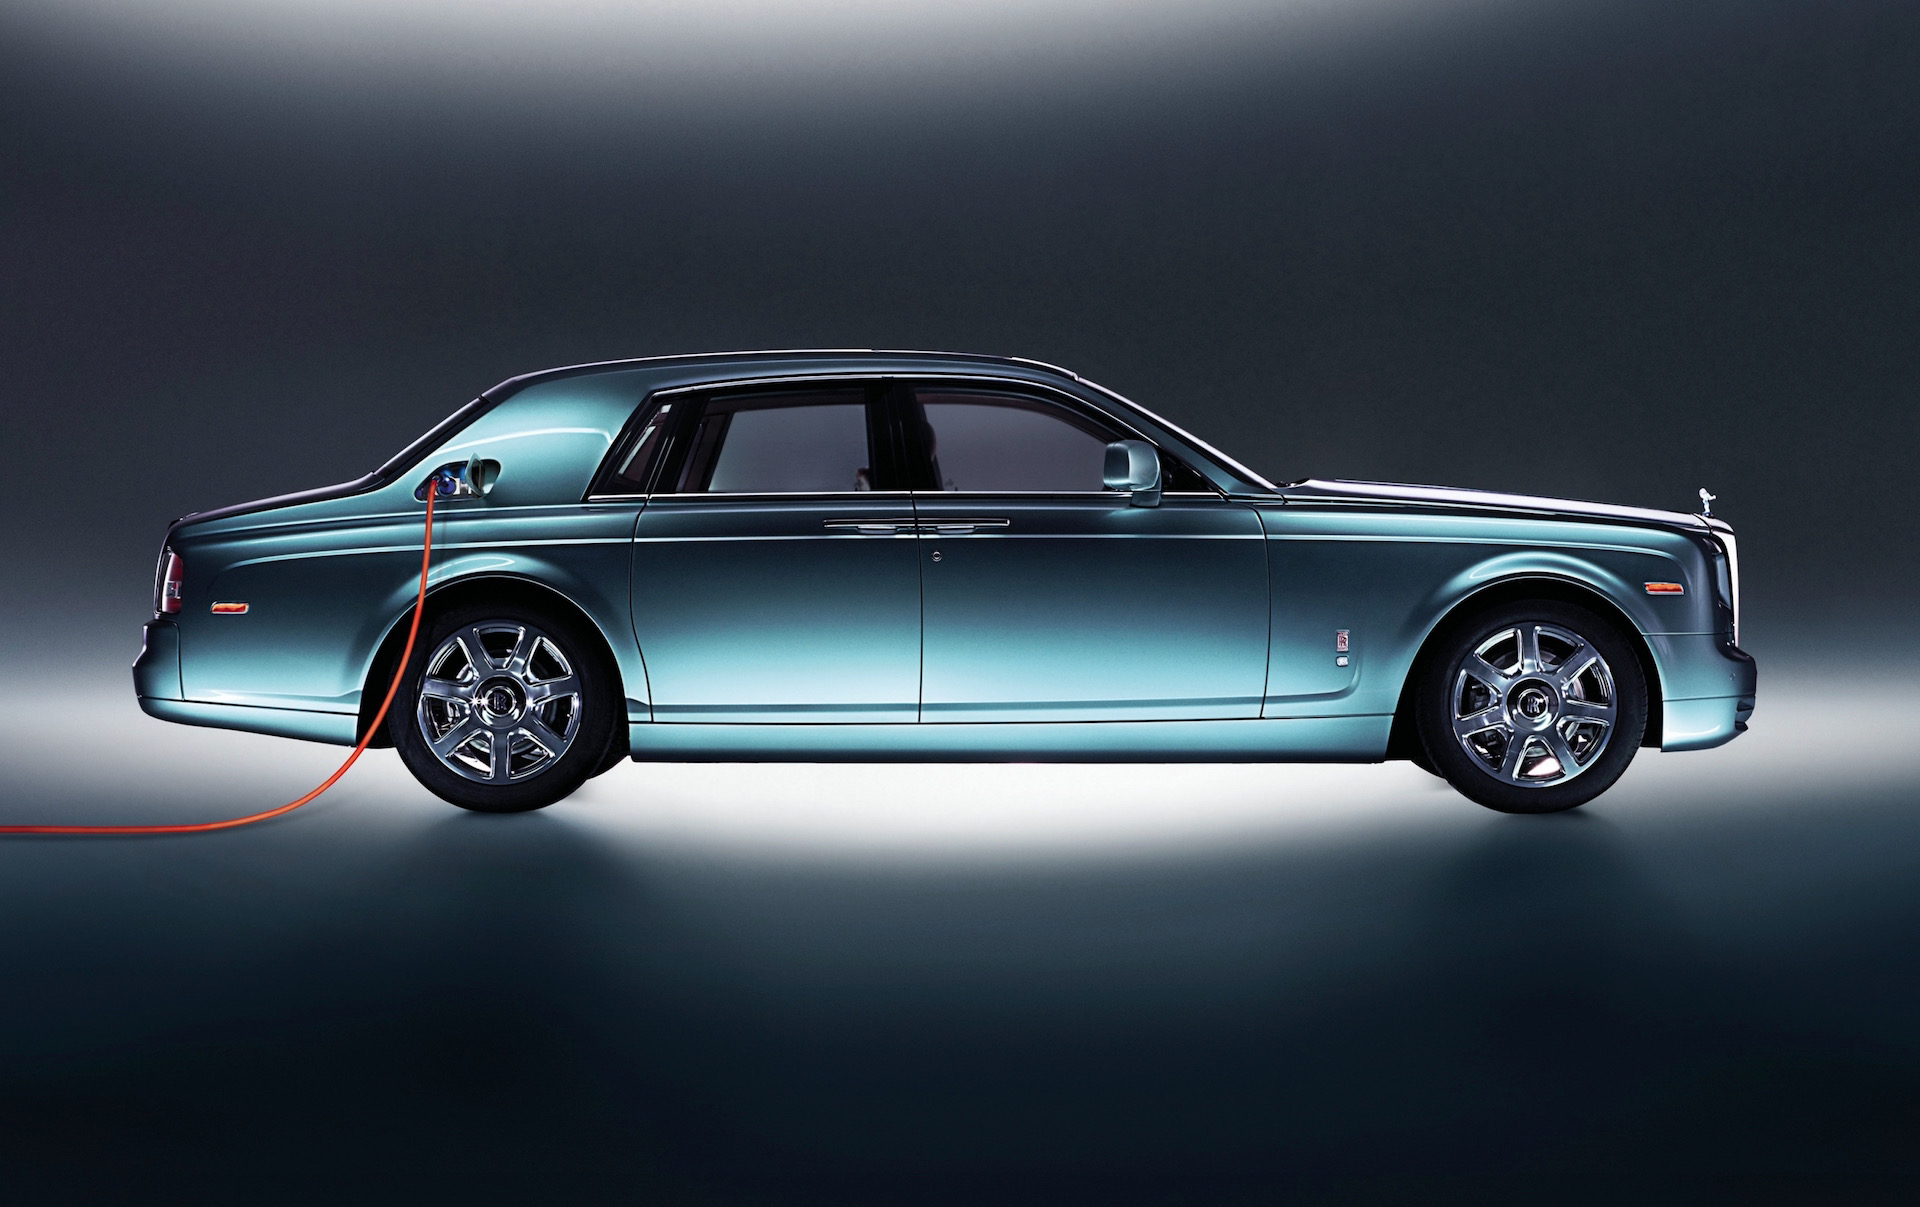 RollsRoyce to unveil electric vehicle plans, will introduce EV this